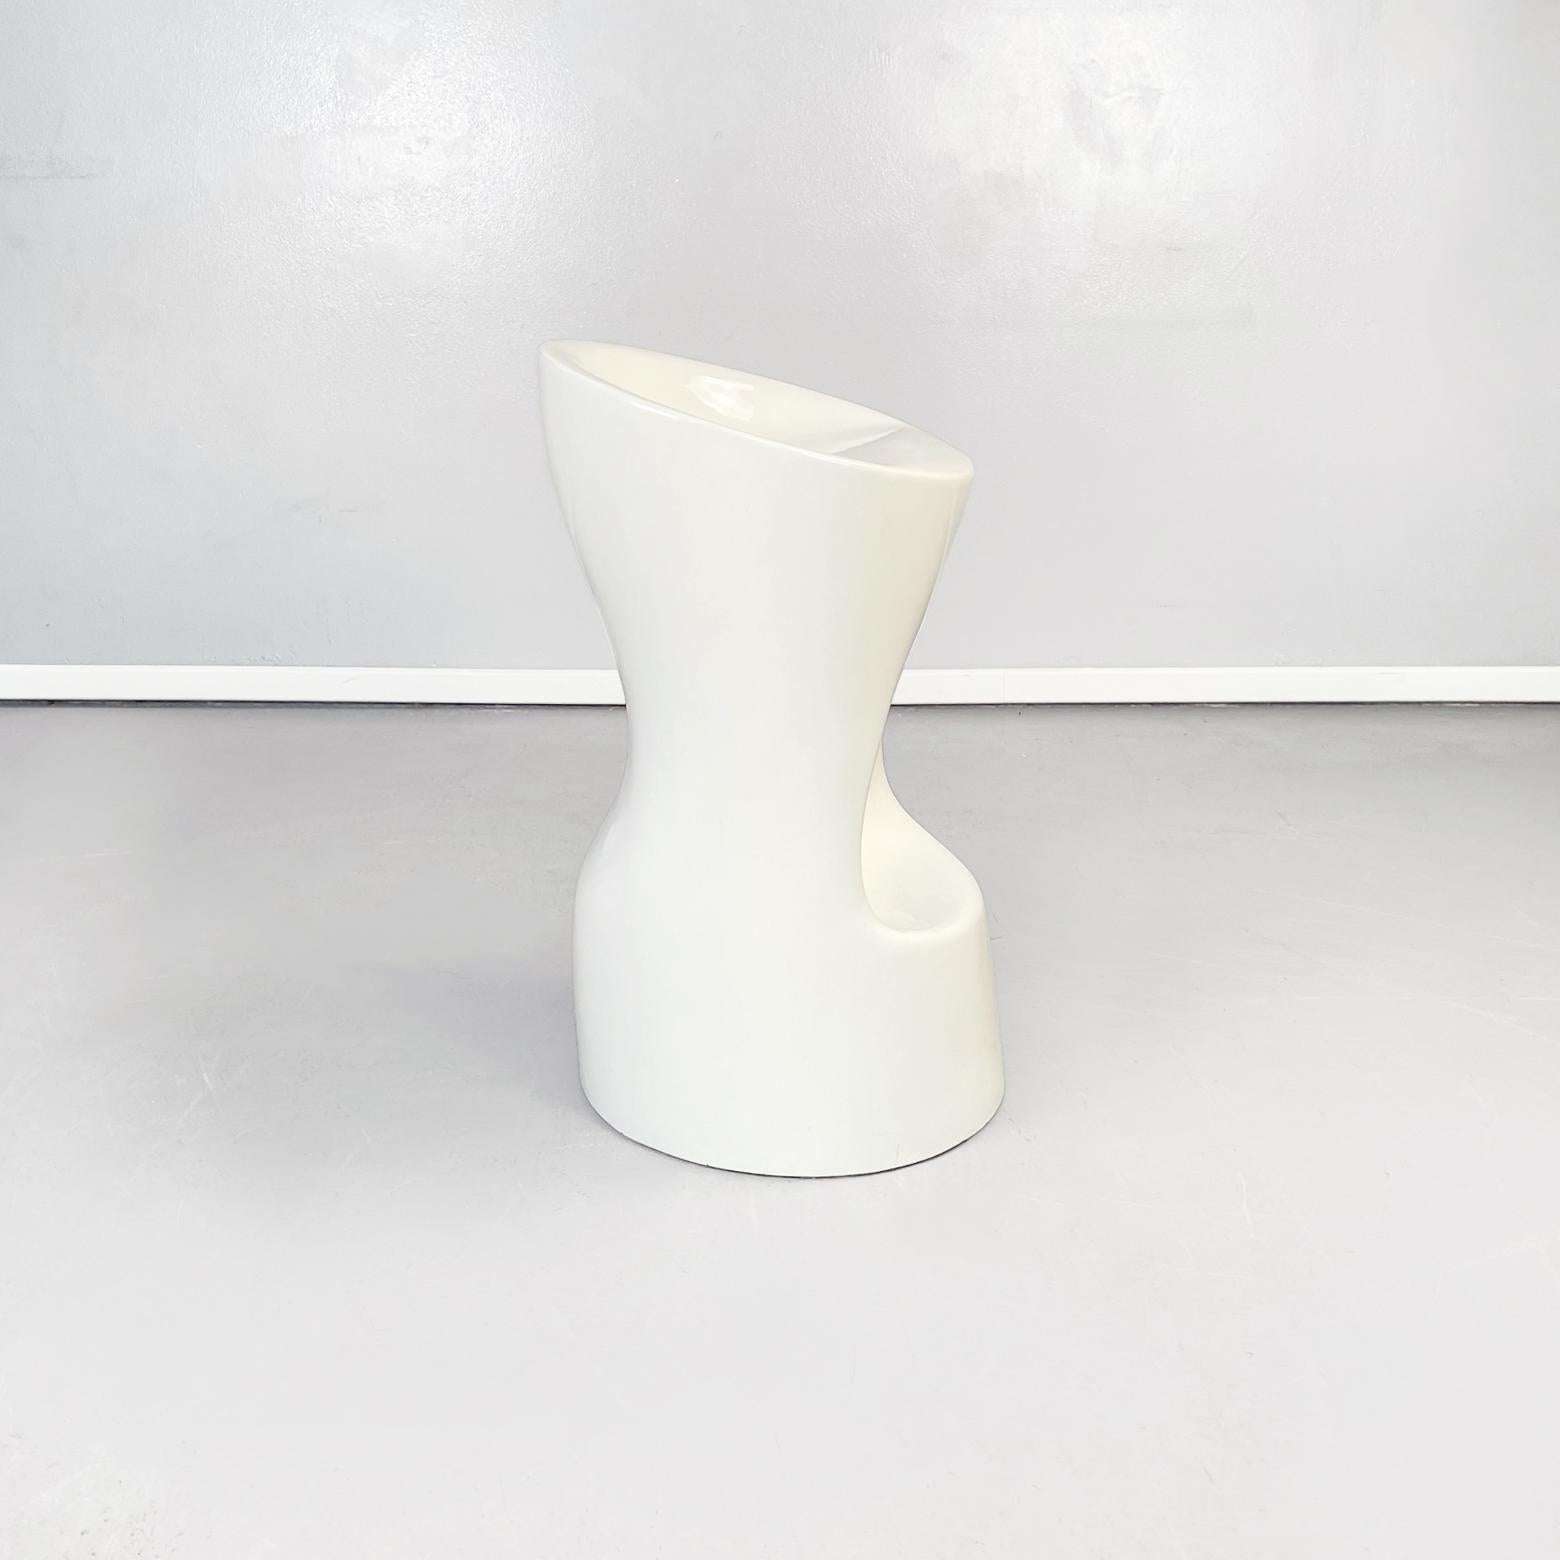 Contemporary Italian Space Age Modern Stool with Footrest in White Plastic, 2000s For Sale